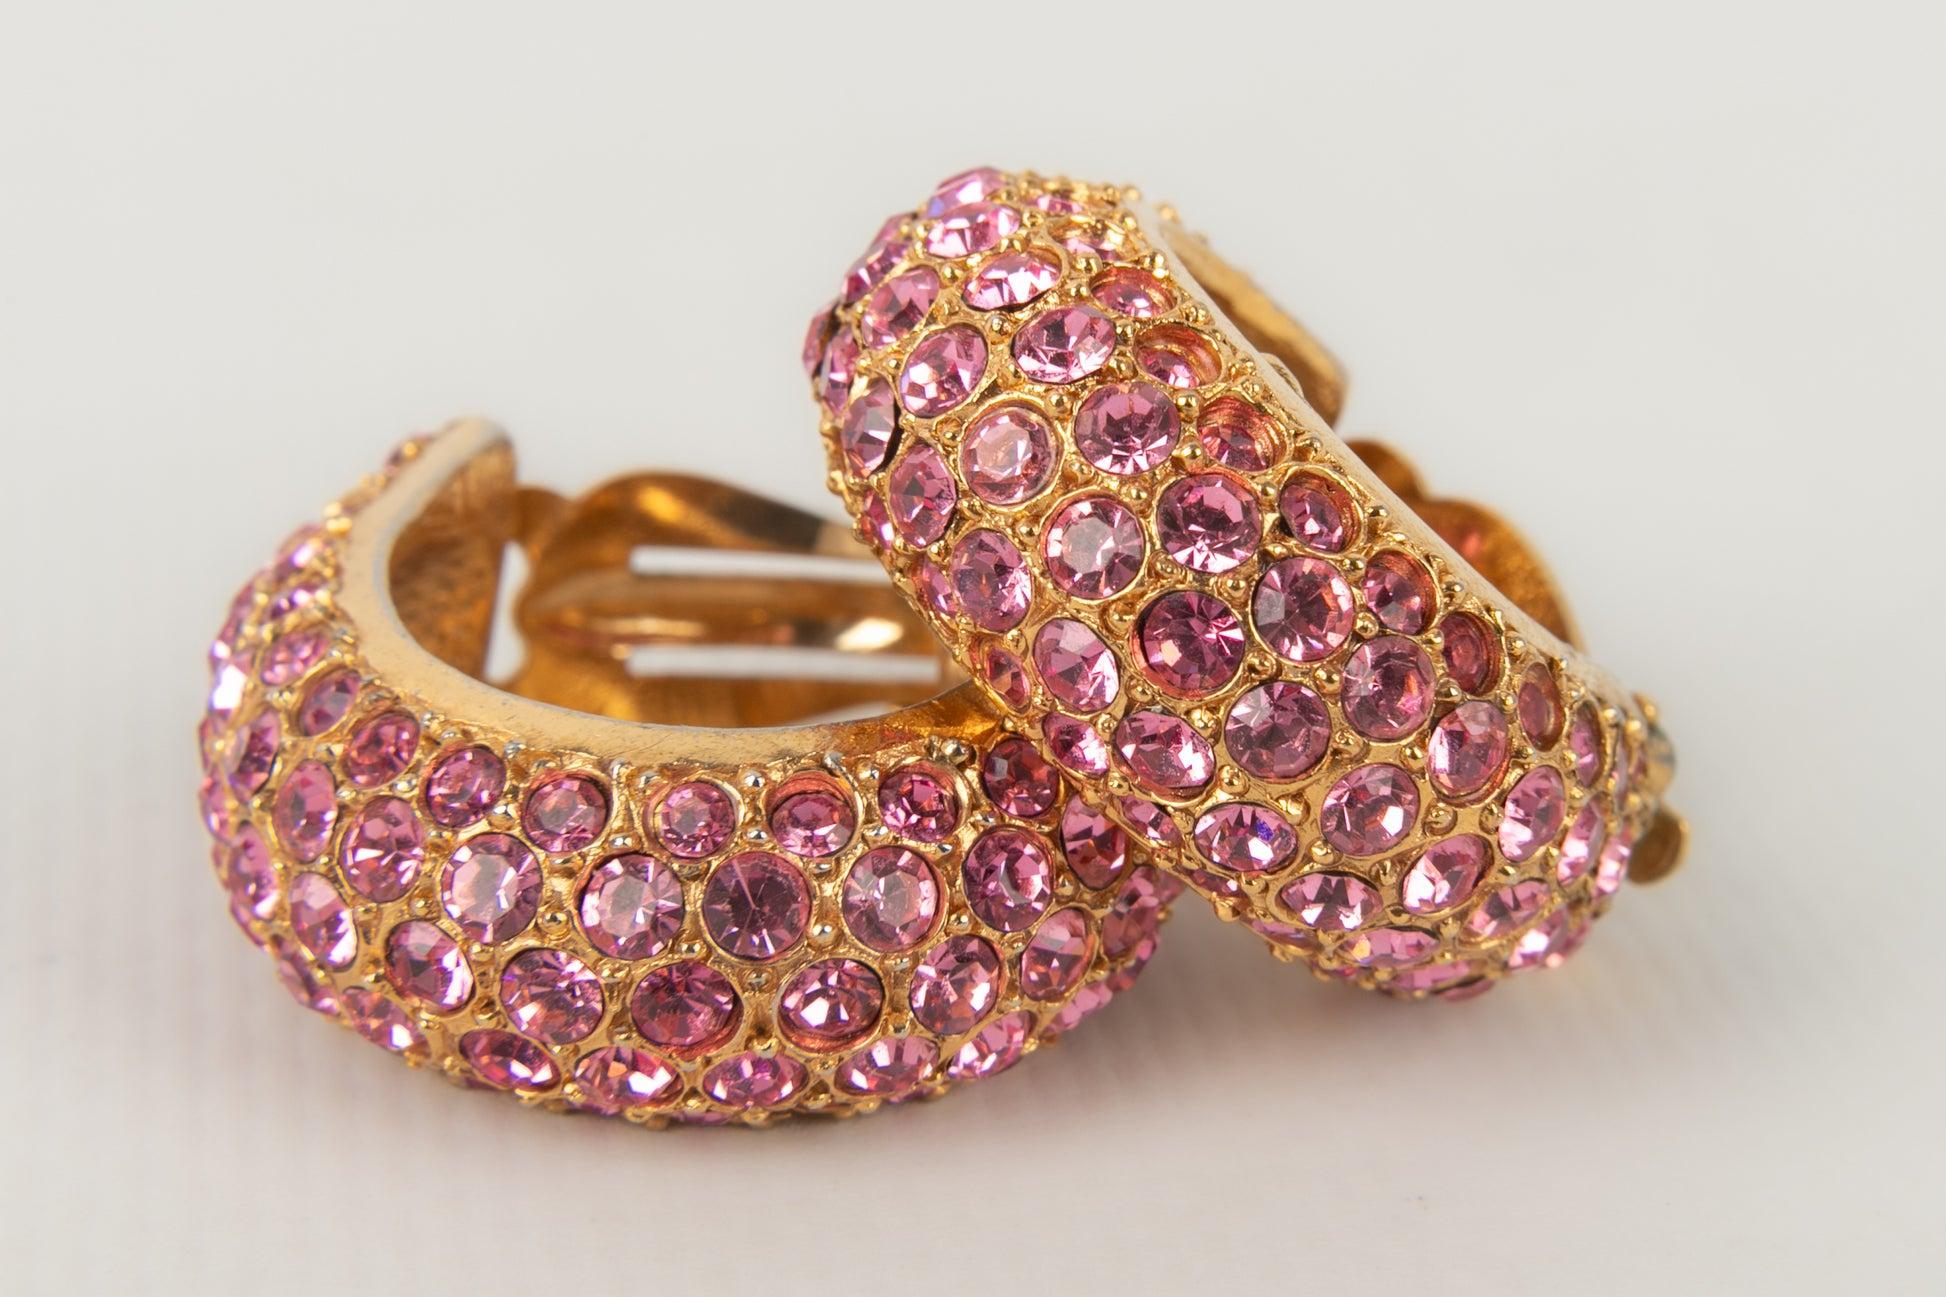 Women's Christian Dior Golden Metal Clip-On Earrings Ornamented with Pink Rhinestones For Sale